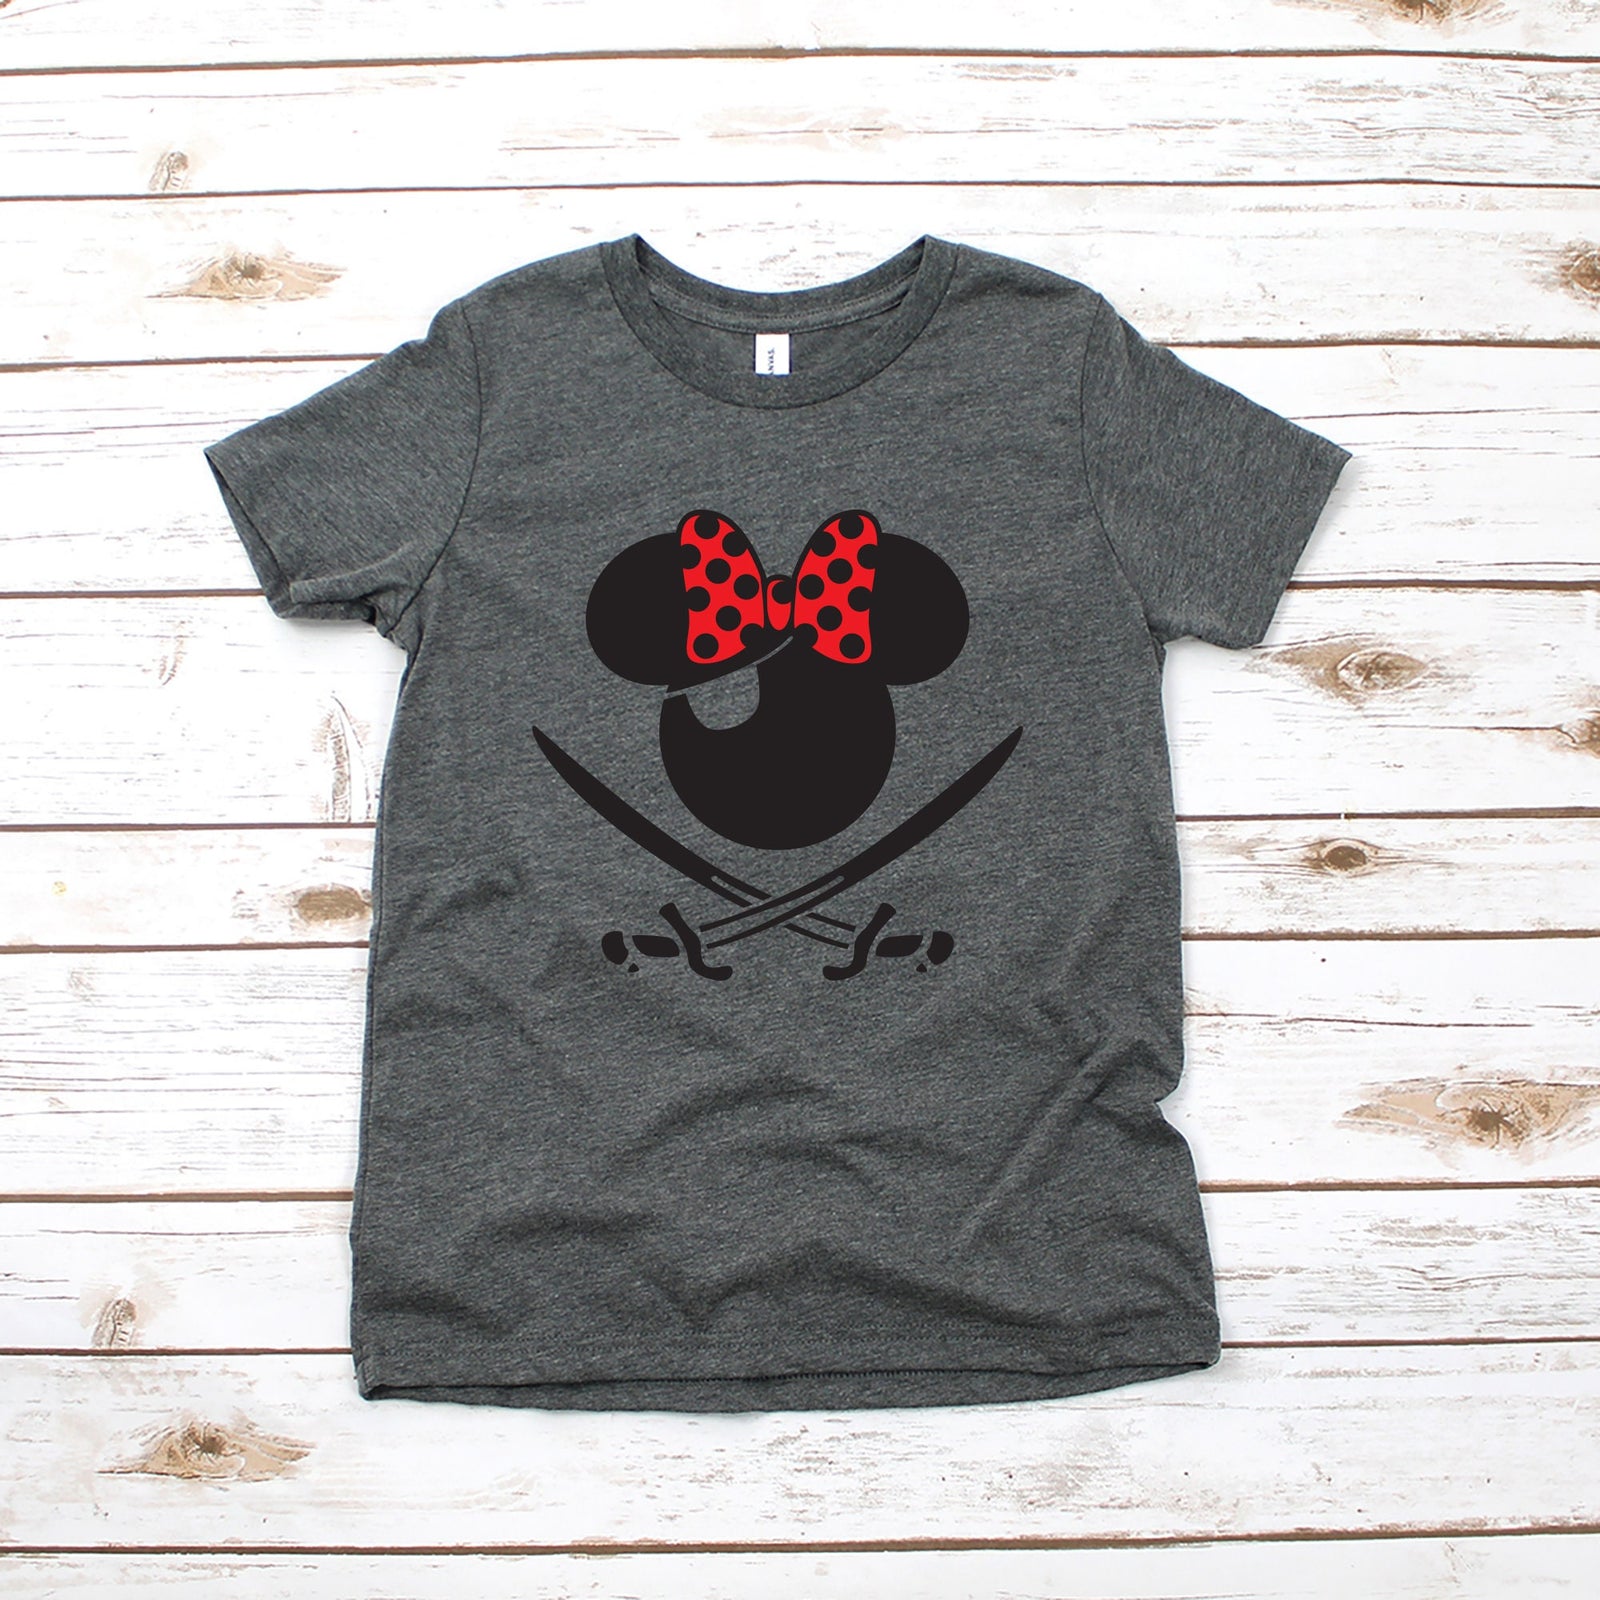 Pirate Minnie Mouse Youth T Shirt - Disney Kids T Shirts - Disney Pirate Family Matching Shirts - Disney Cruise